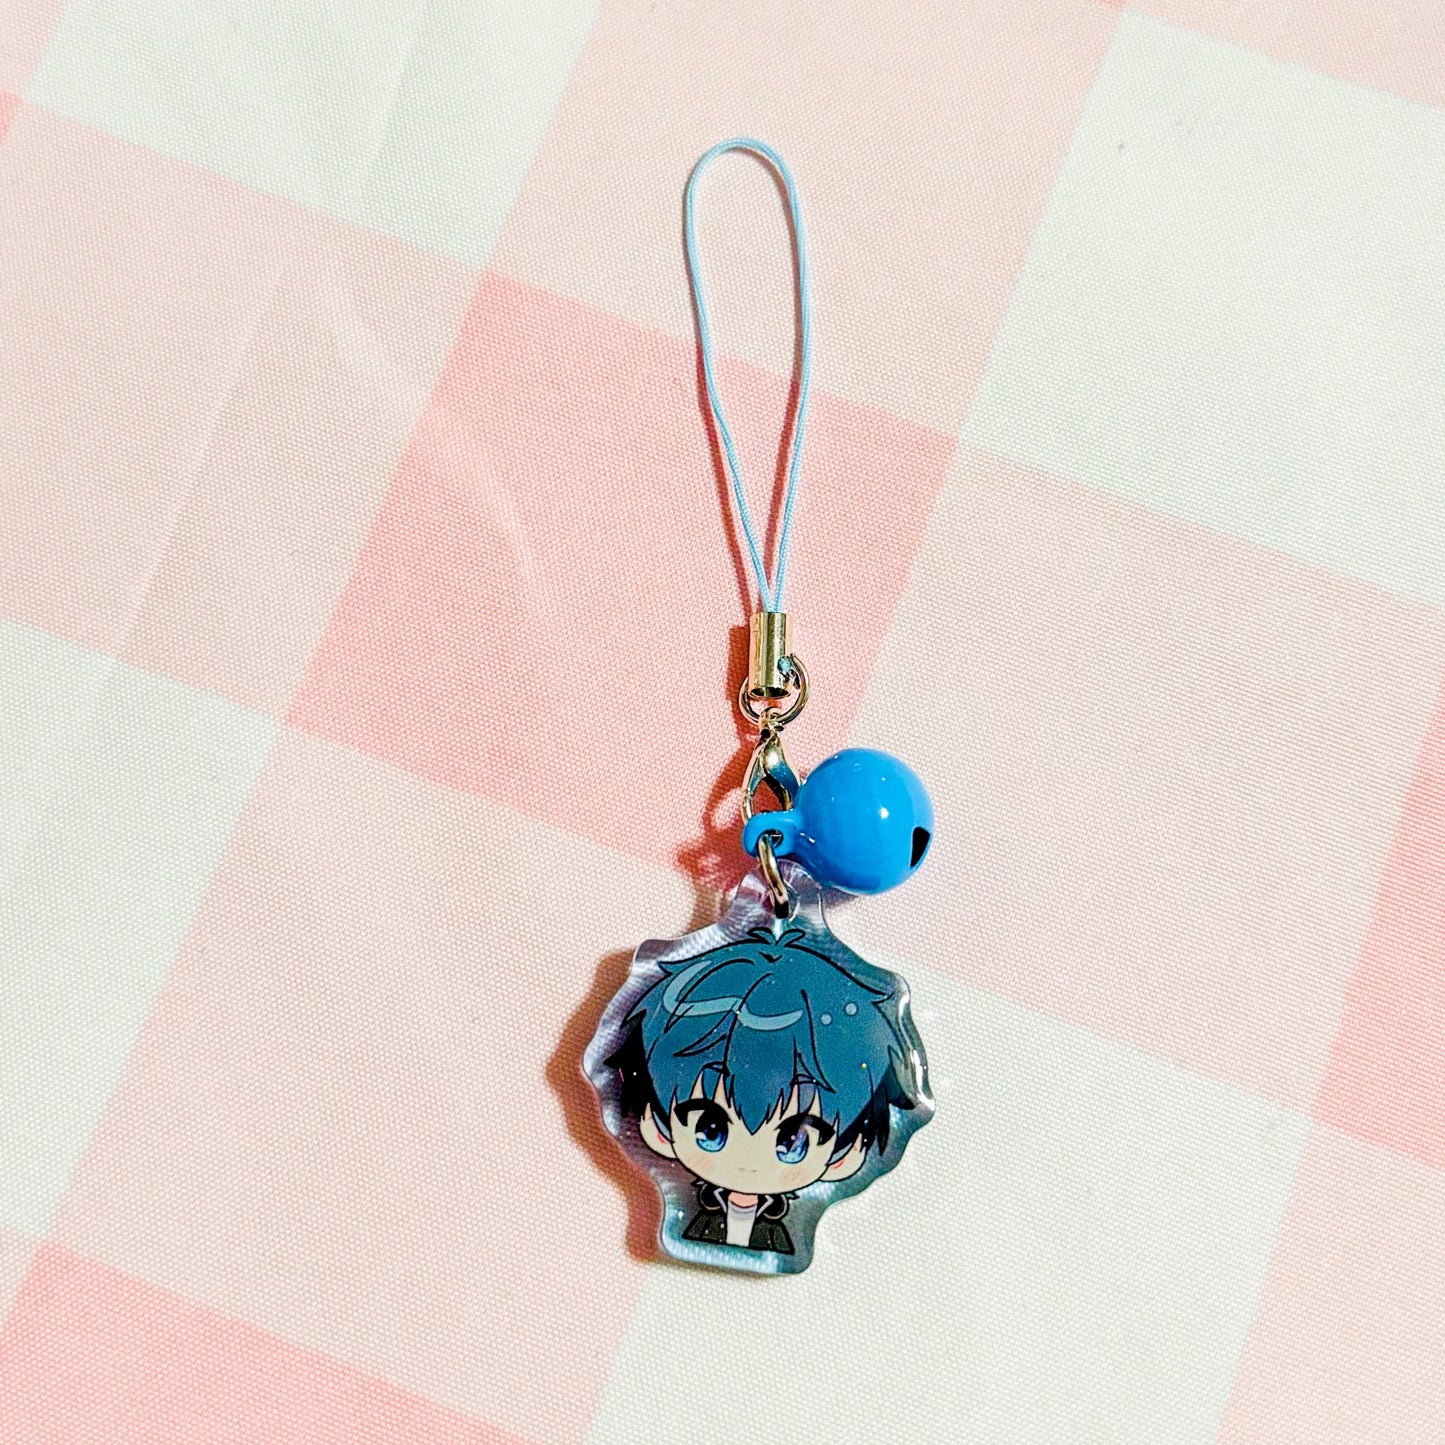 Given Phone Charms